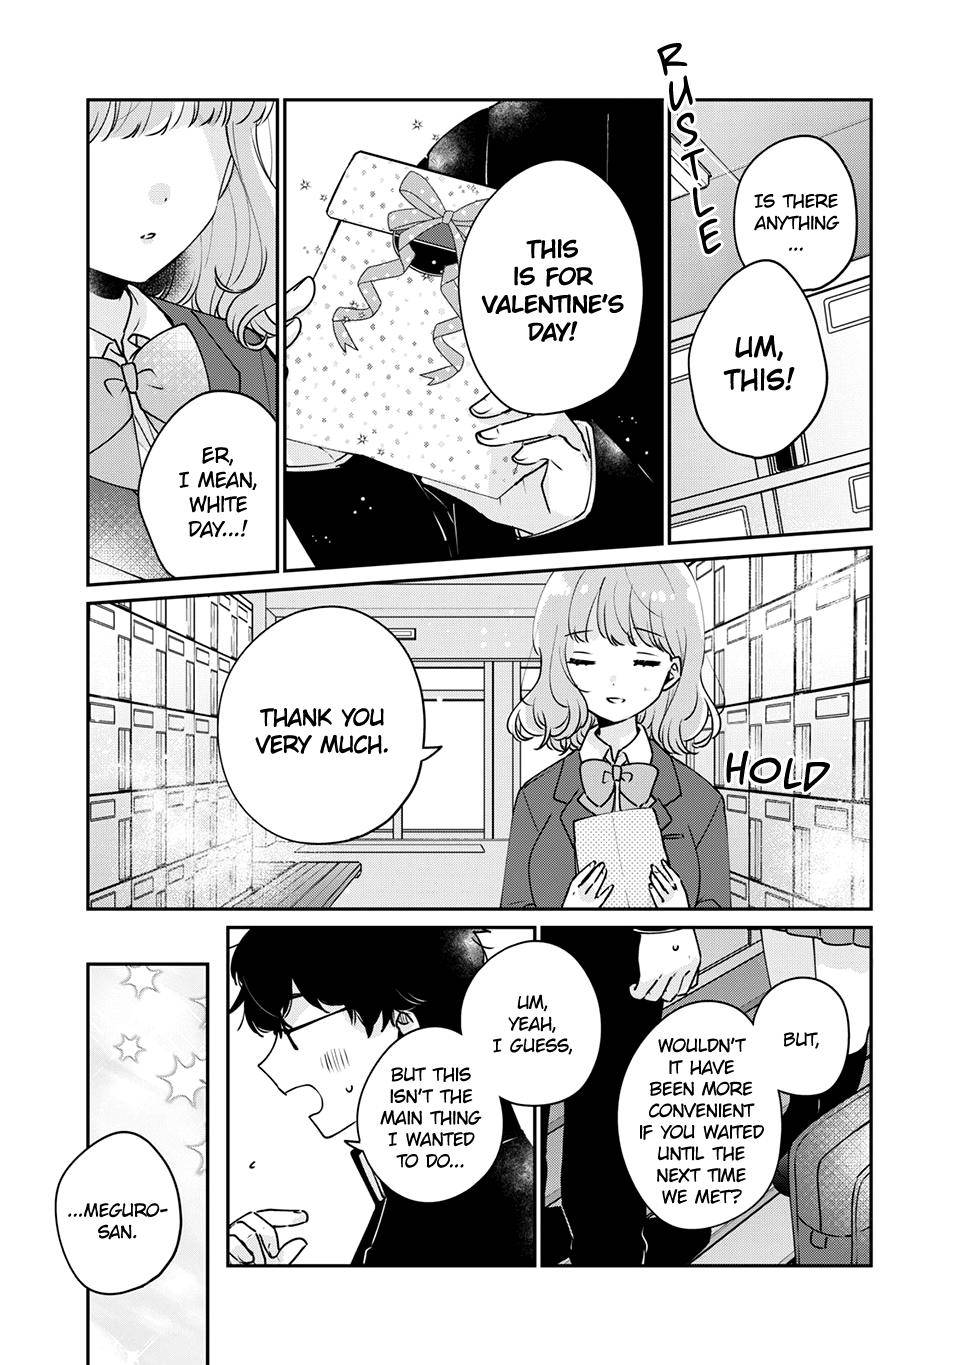 It's Not Meguro-san's First Time chapter 47 page 14